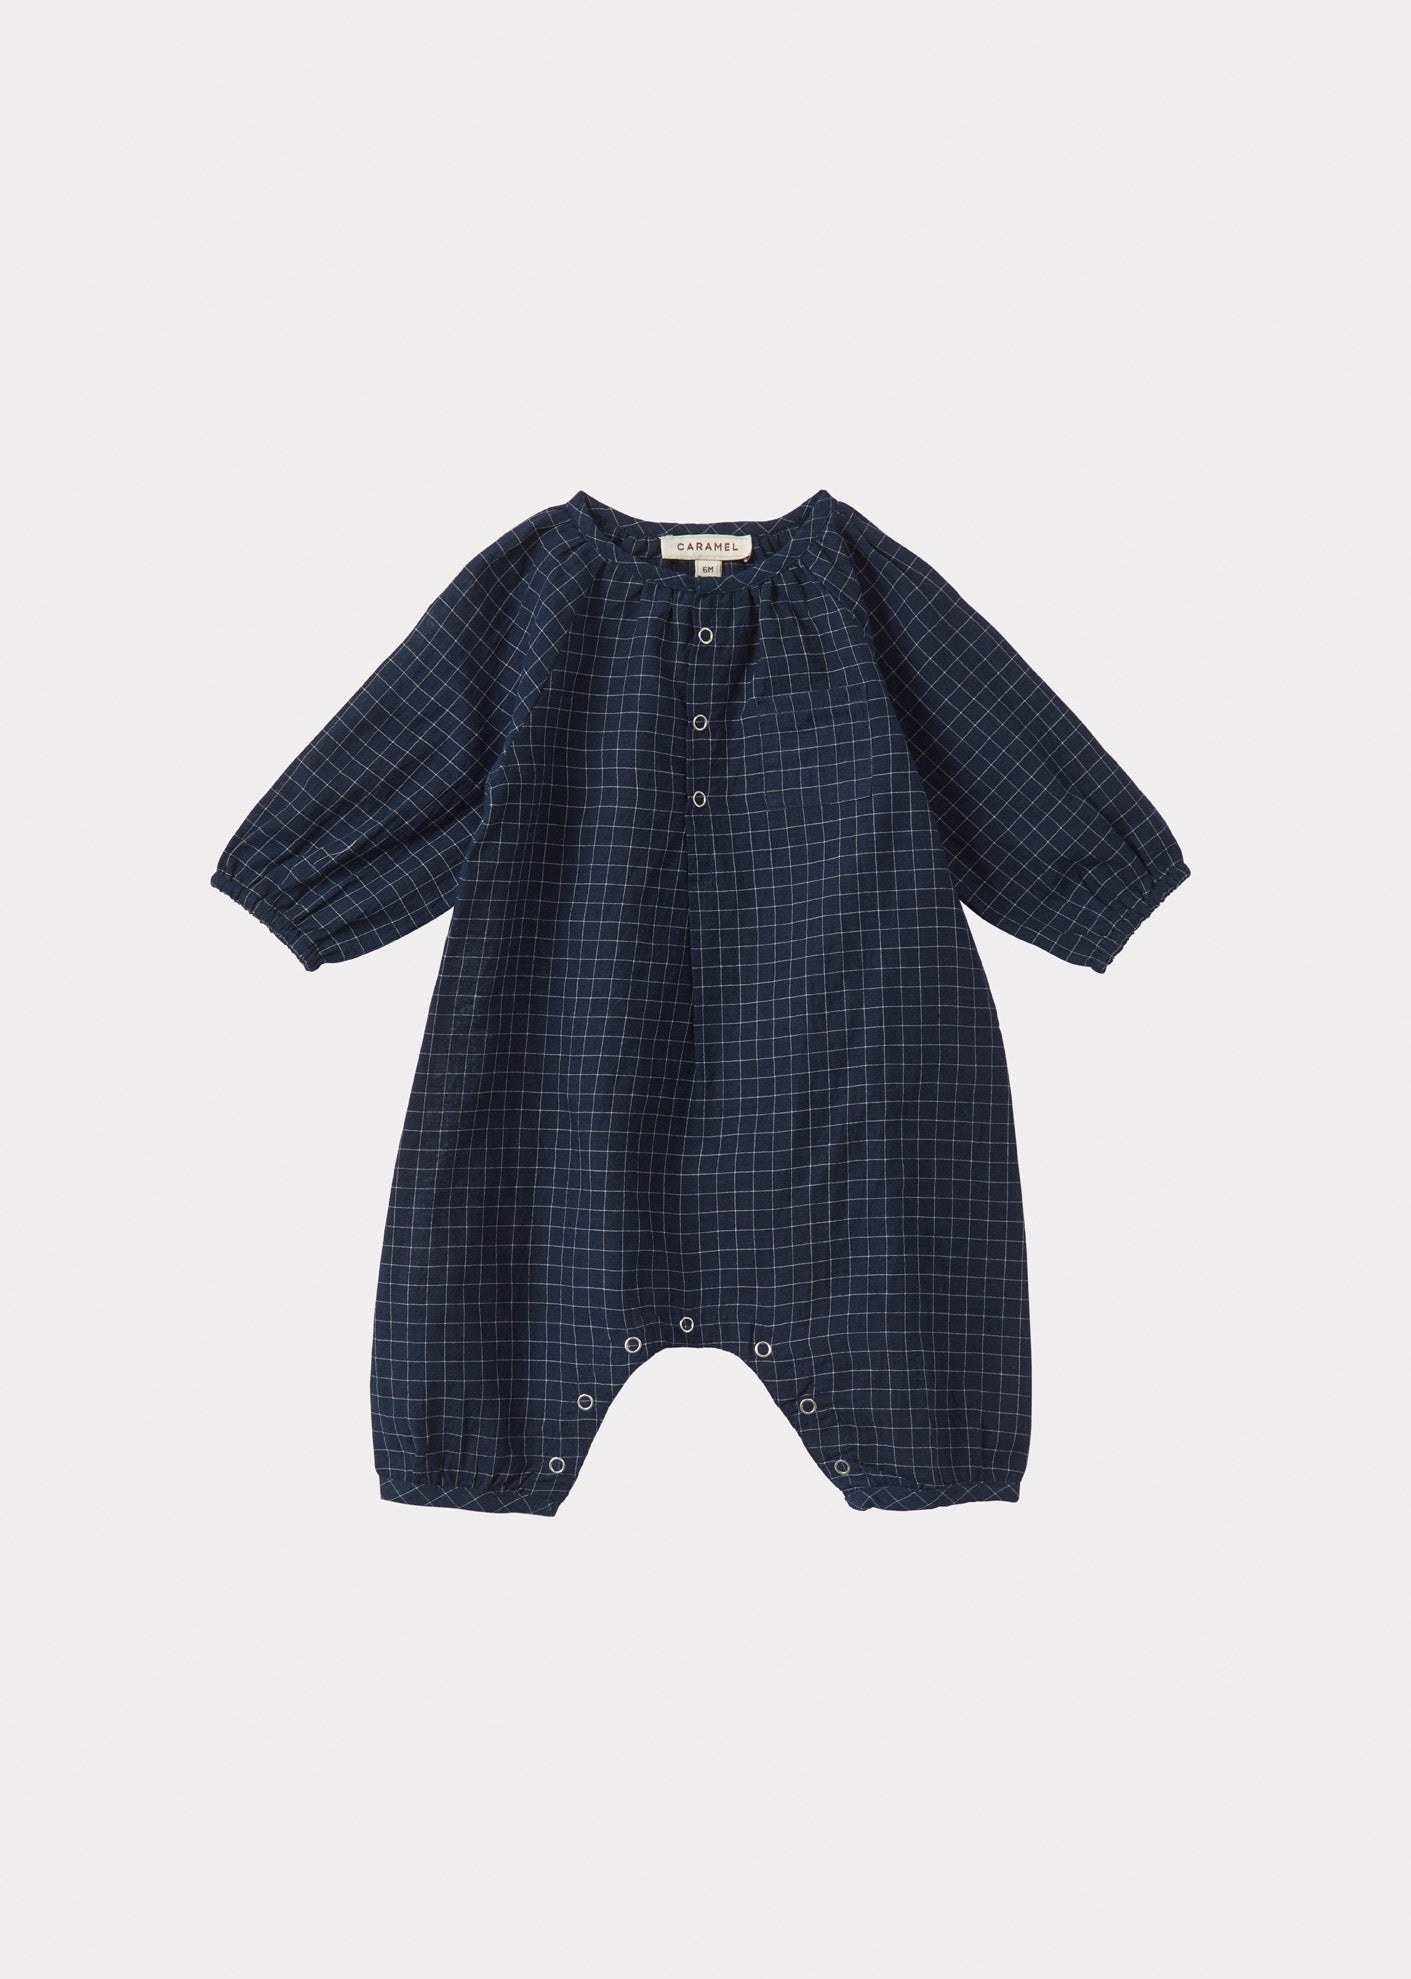 POPULUS BABY ROMPER - NAVY YARN DYED CHECK